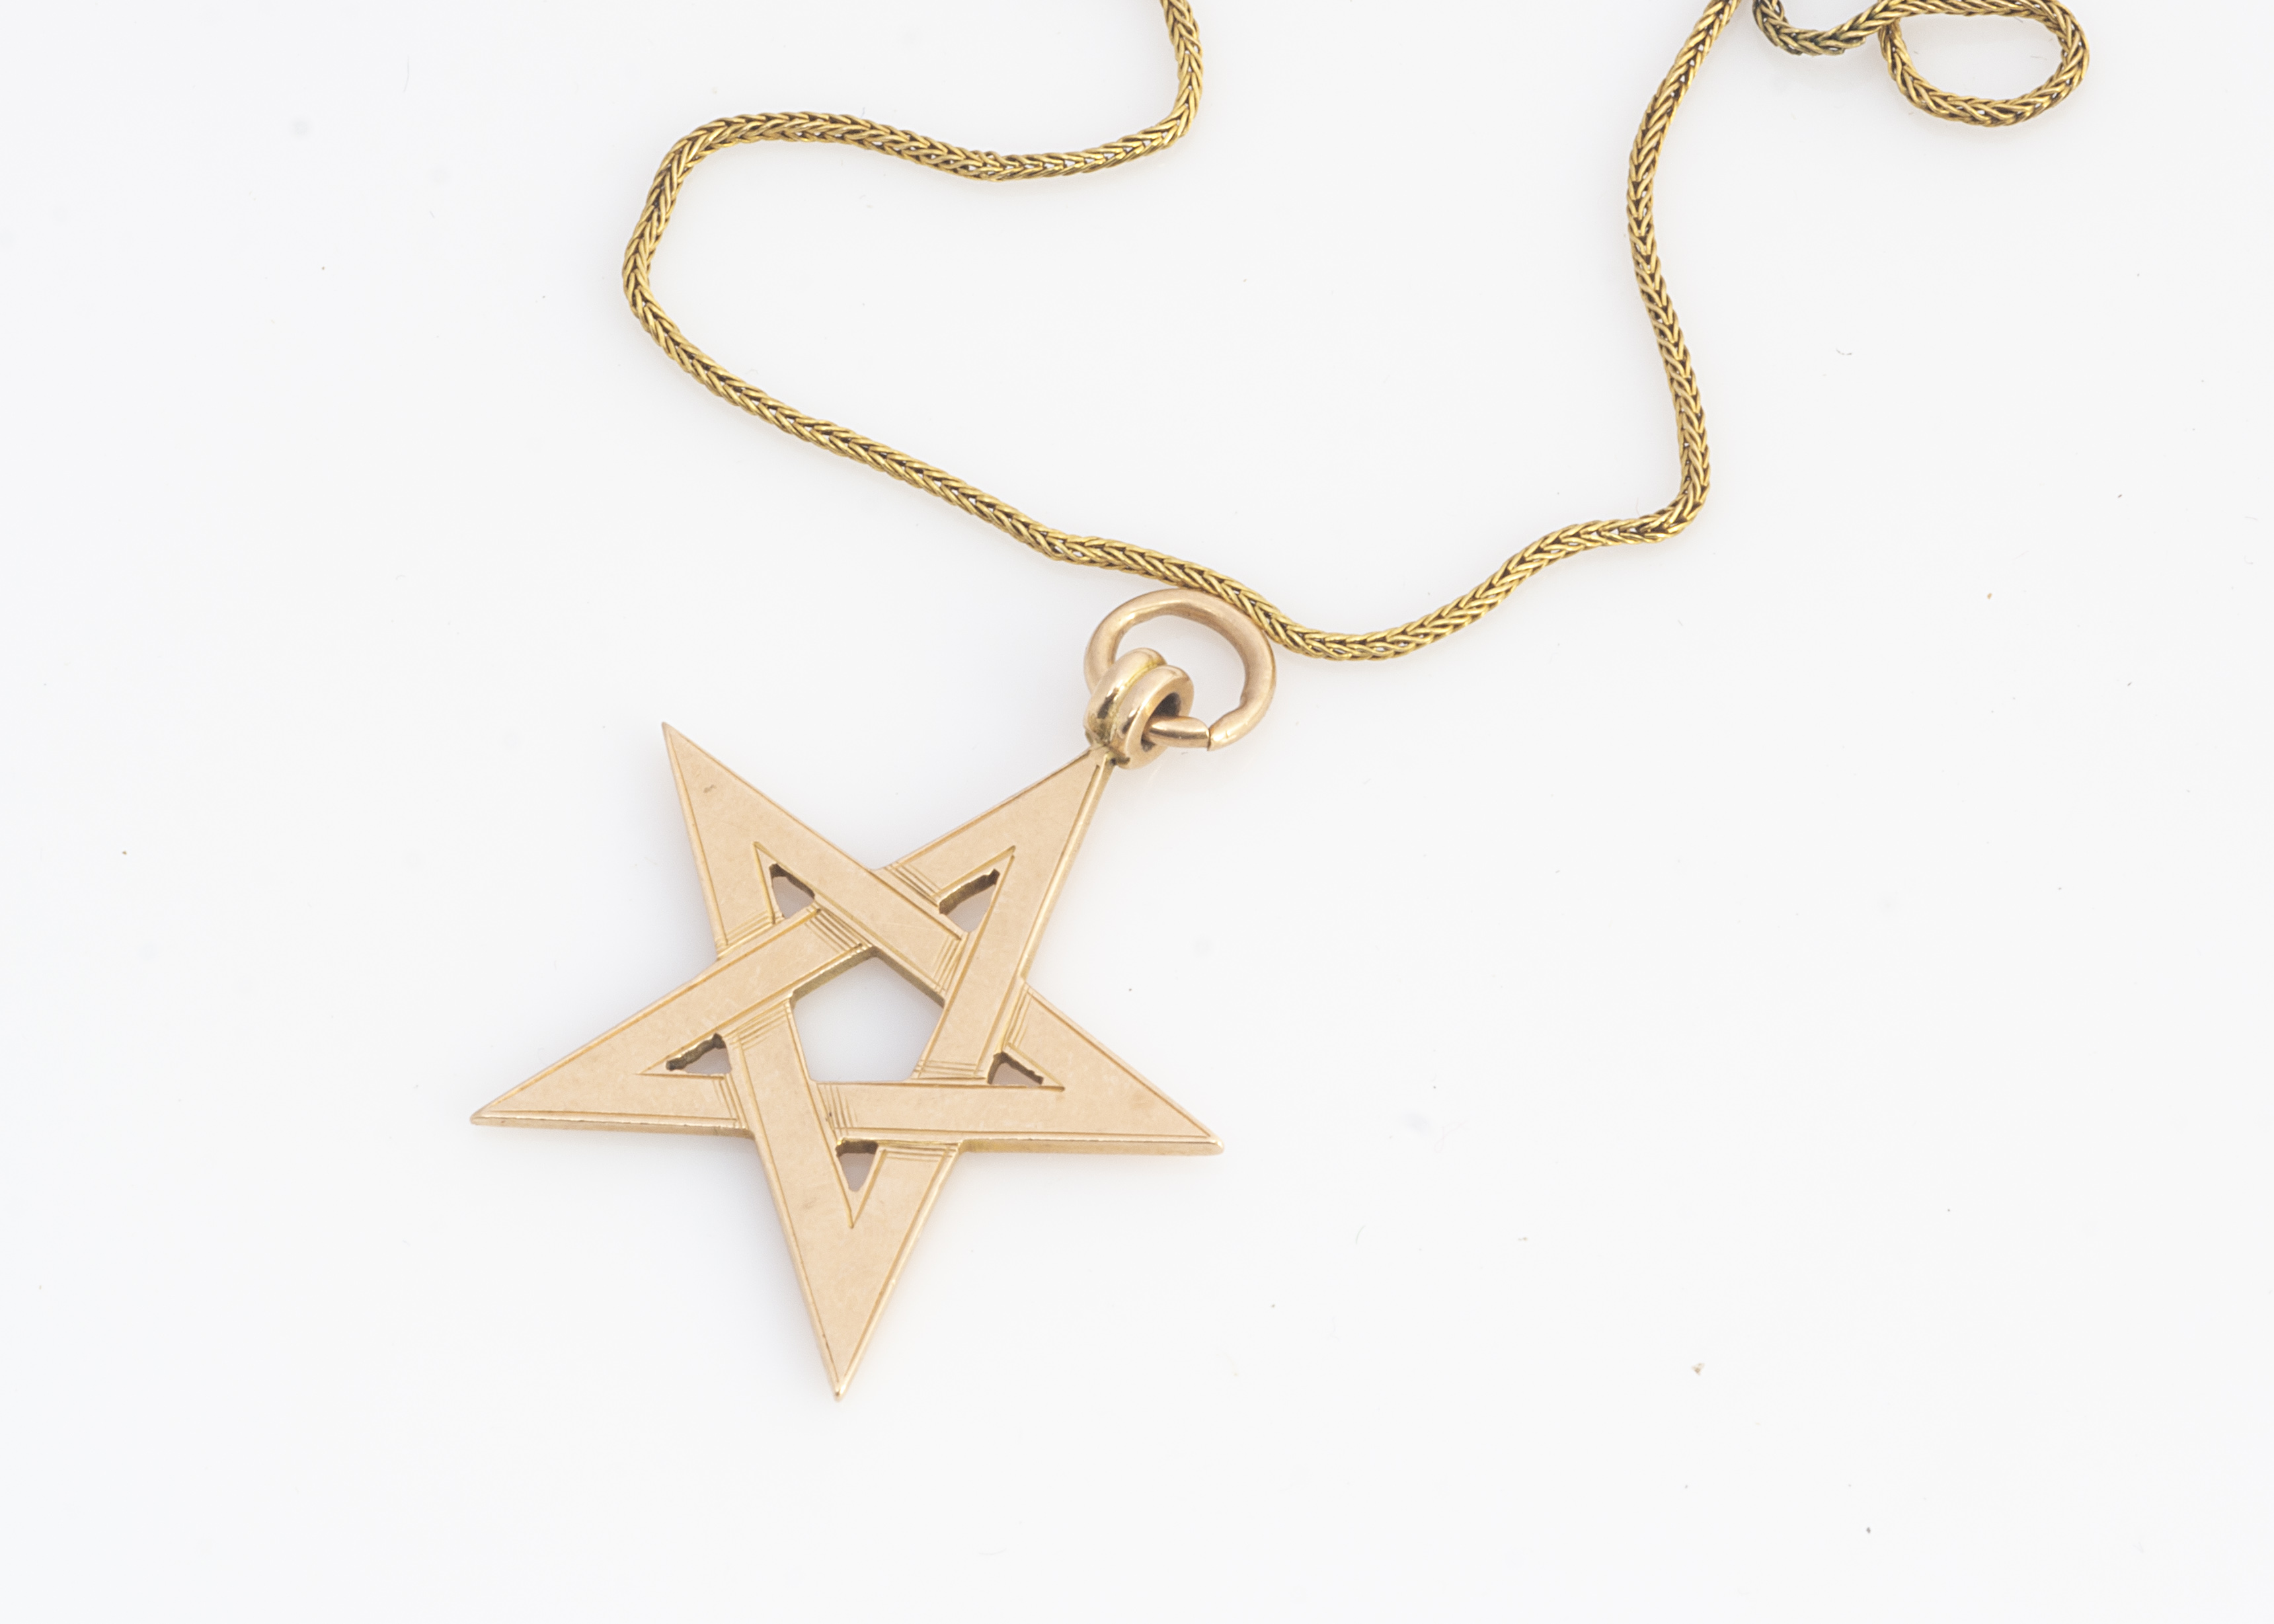 A 15ct gold pentagram pendant, Masonic, marked KNOLE 1414, together with a broken yellow metal